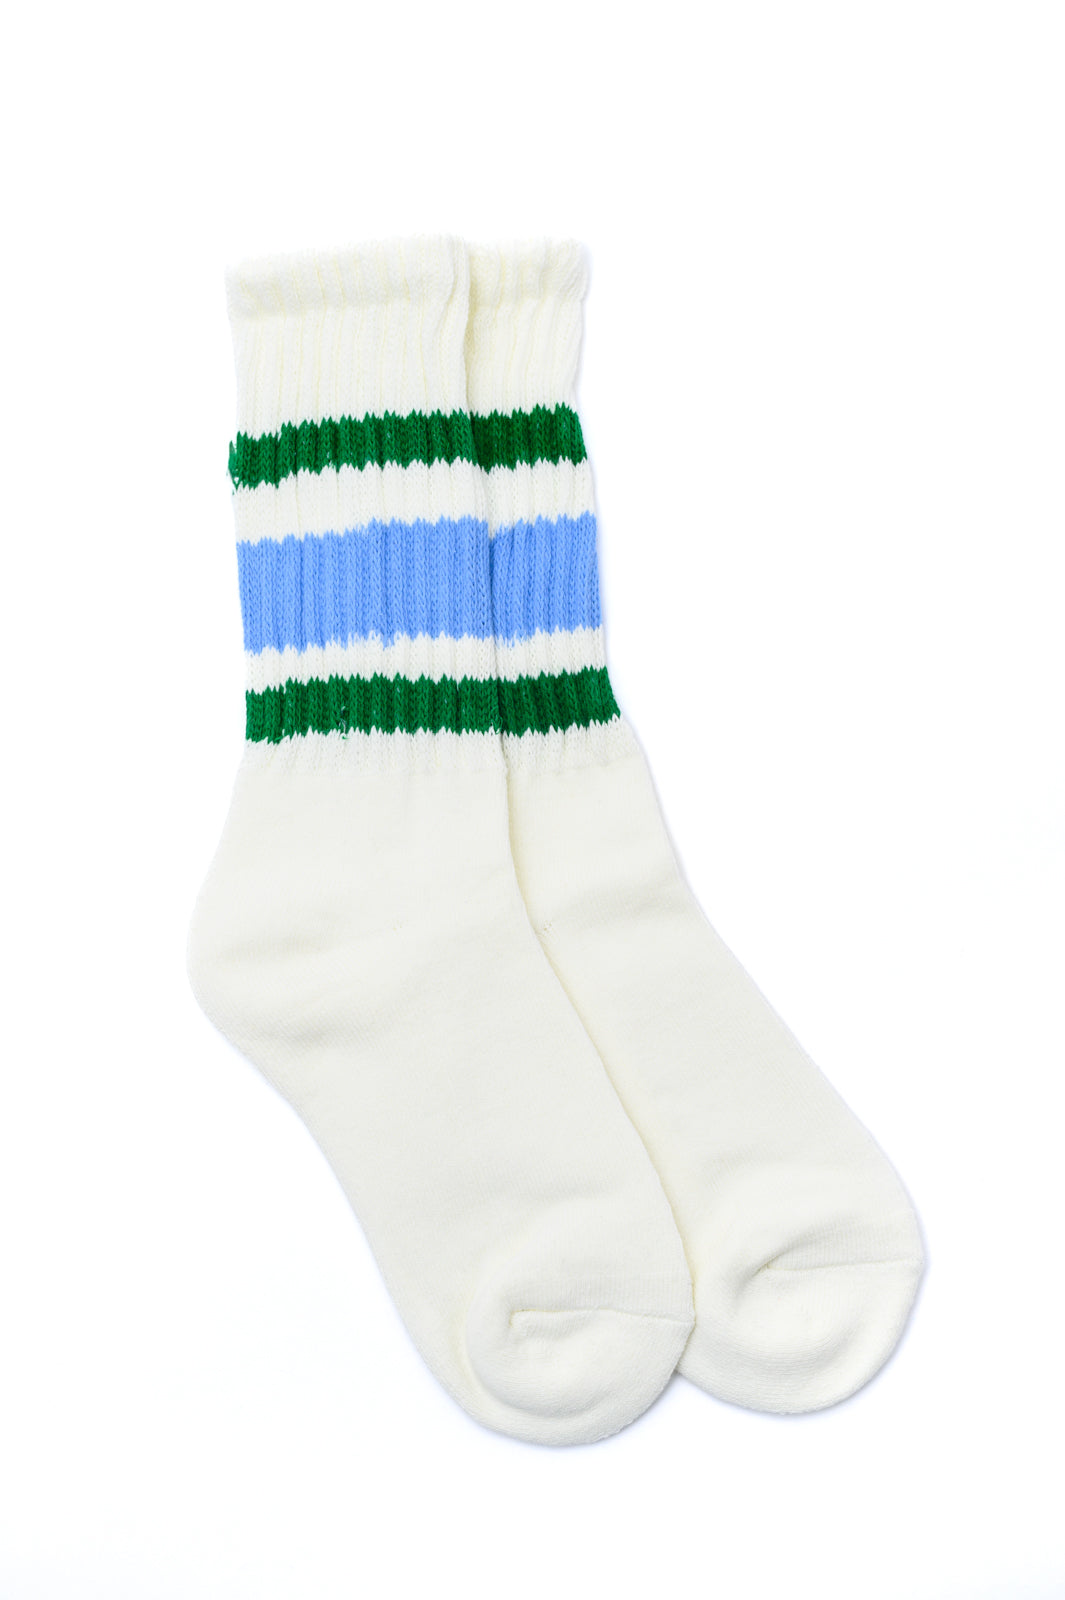 Dad Socks in Green and Blue